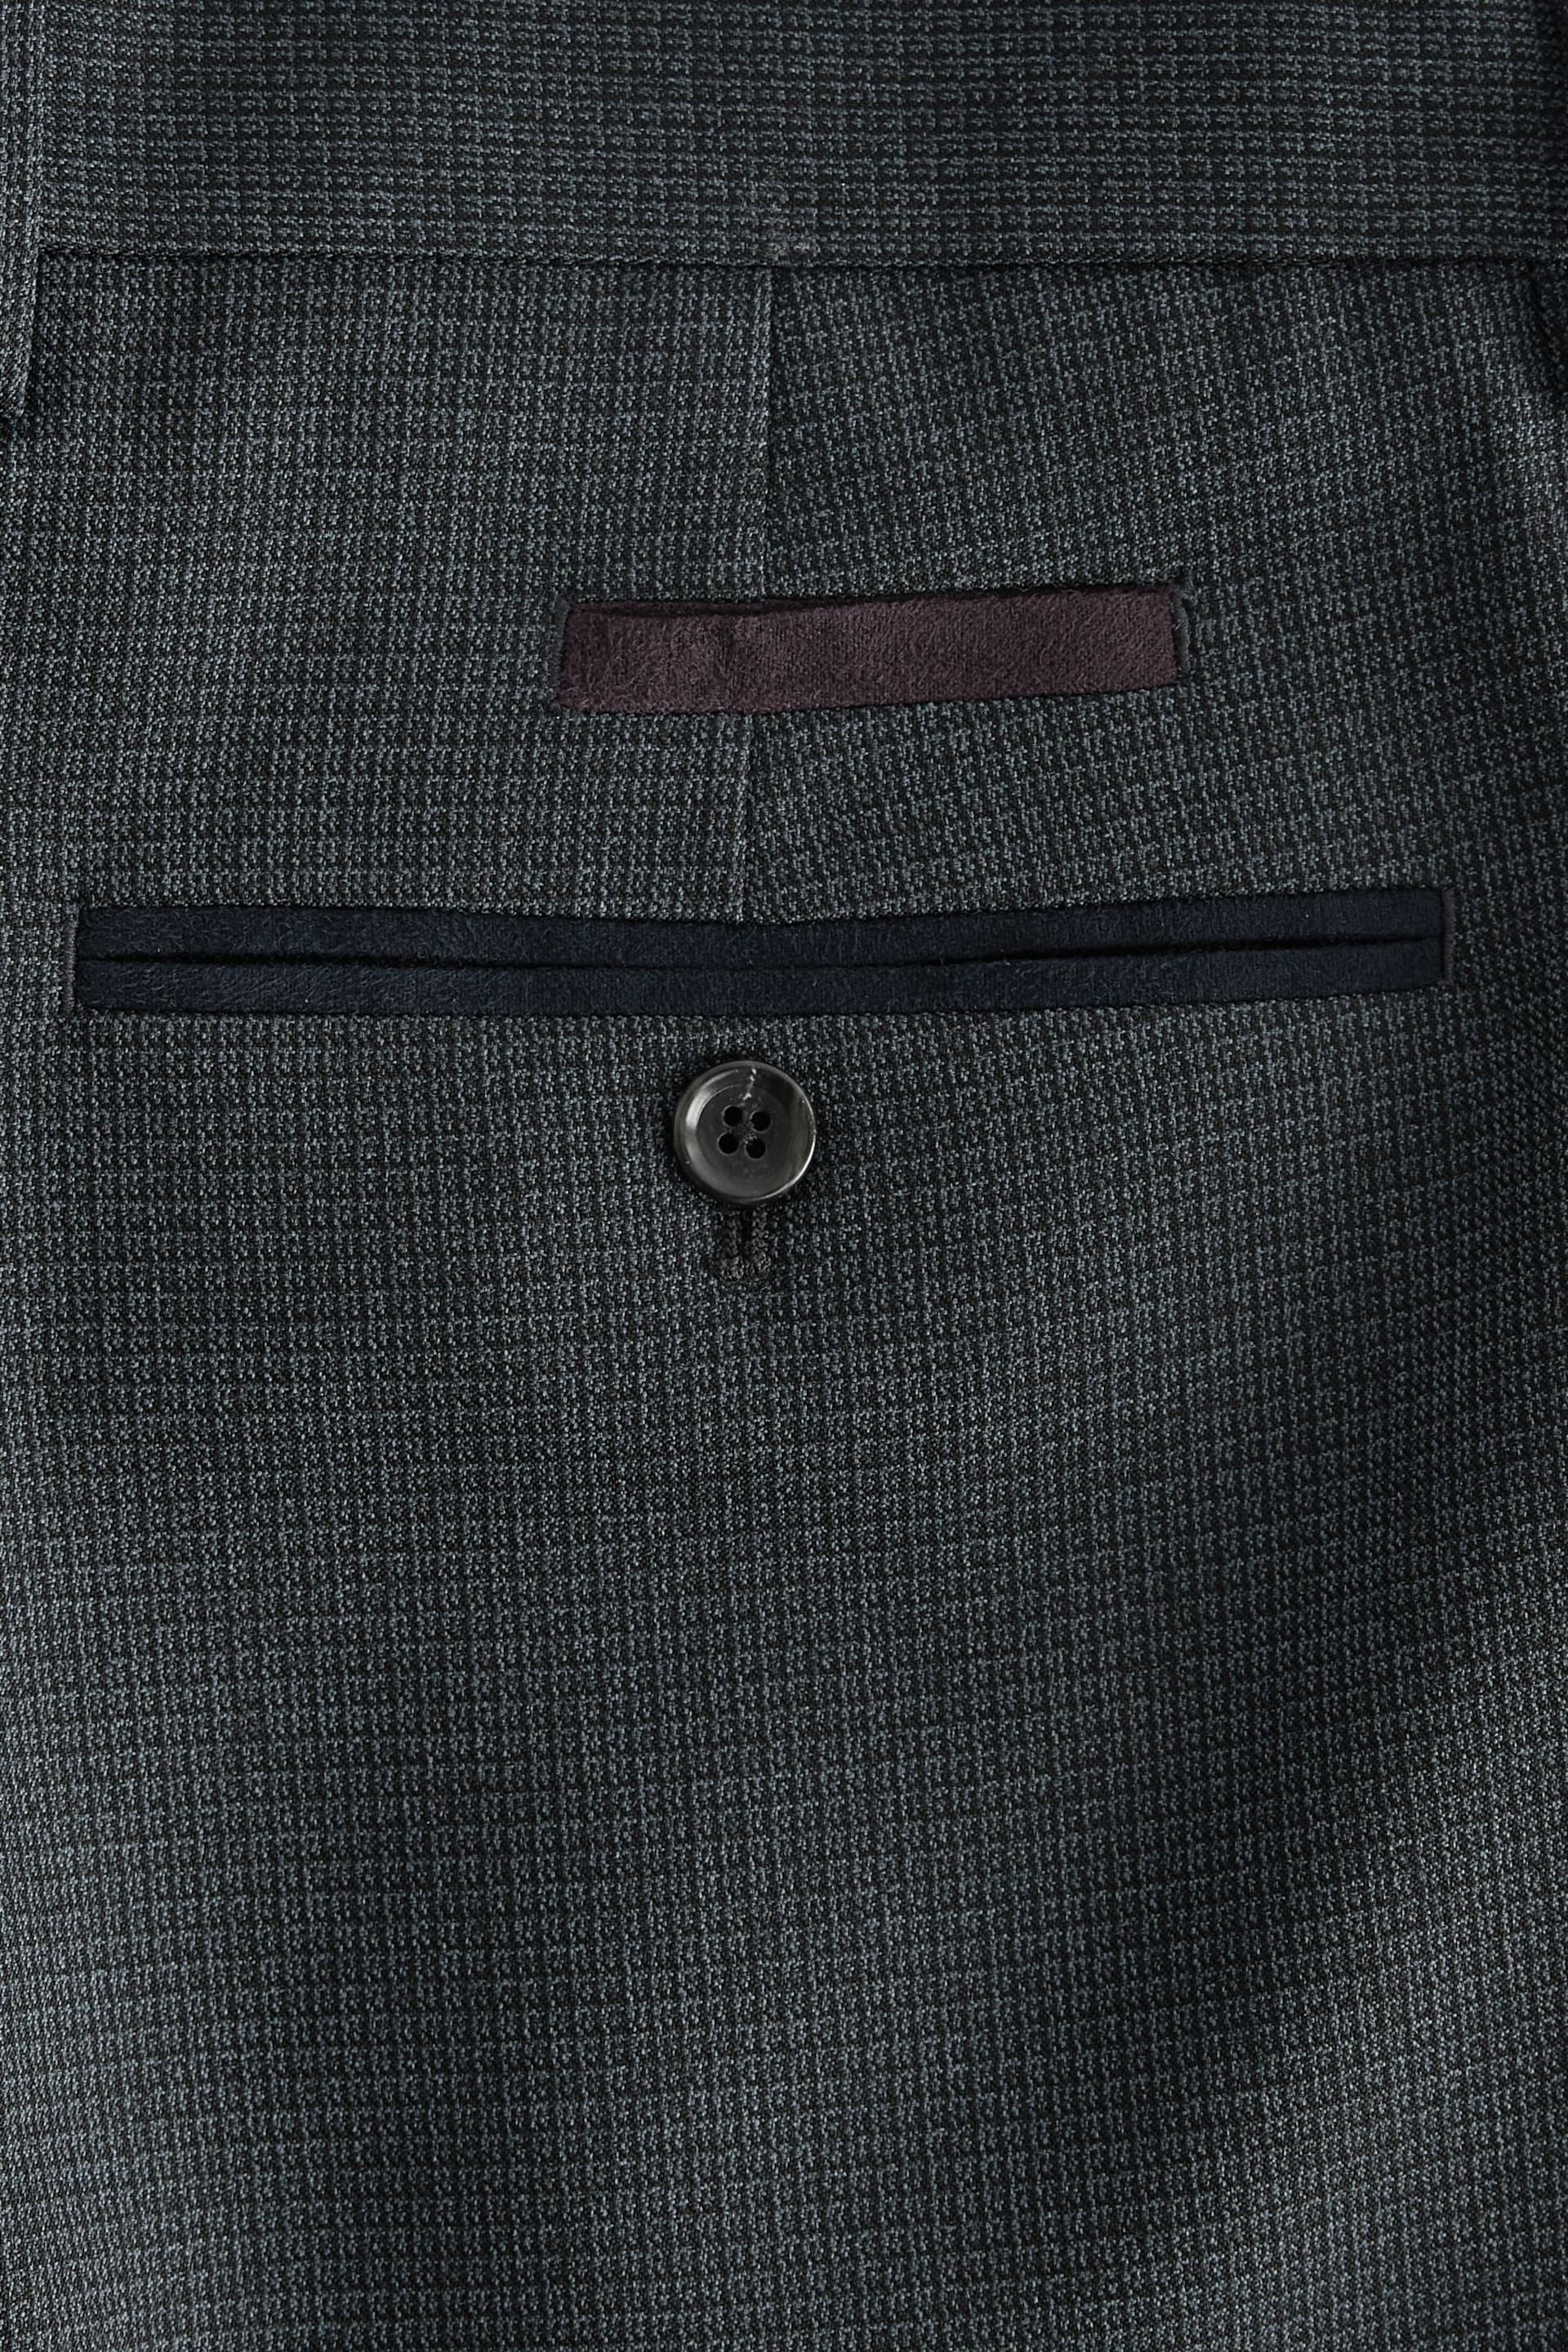 Navy Trimmed Textured Suit Trousers - Image 8 of 9